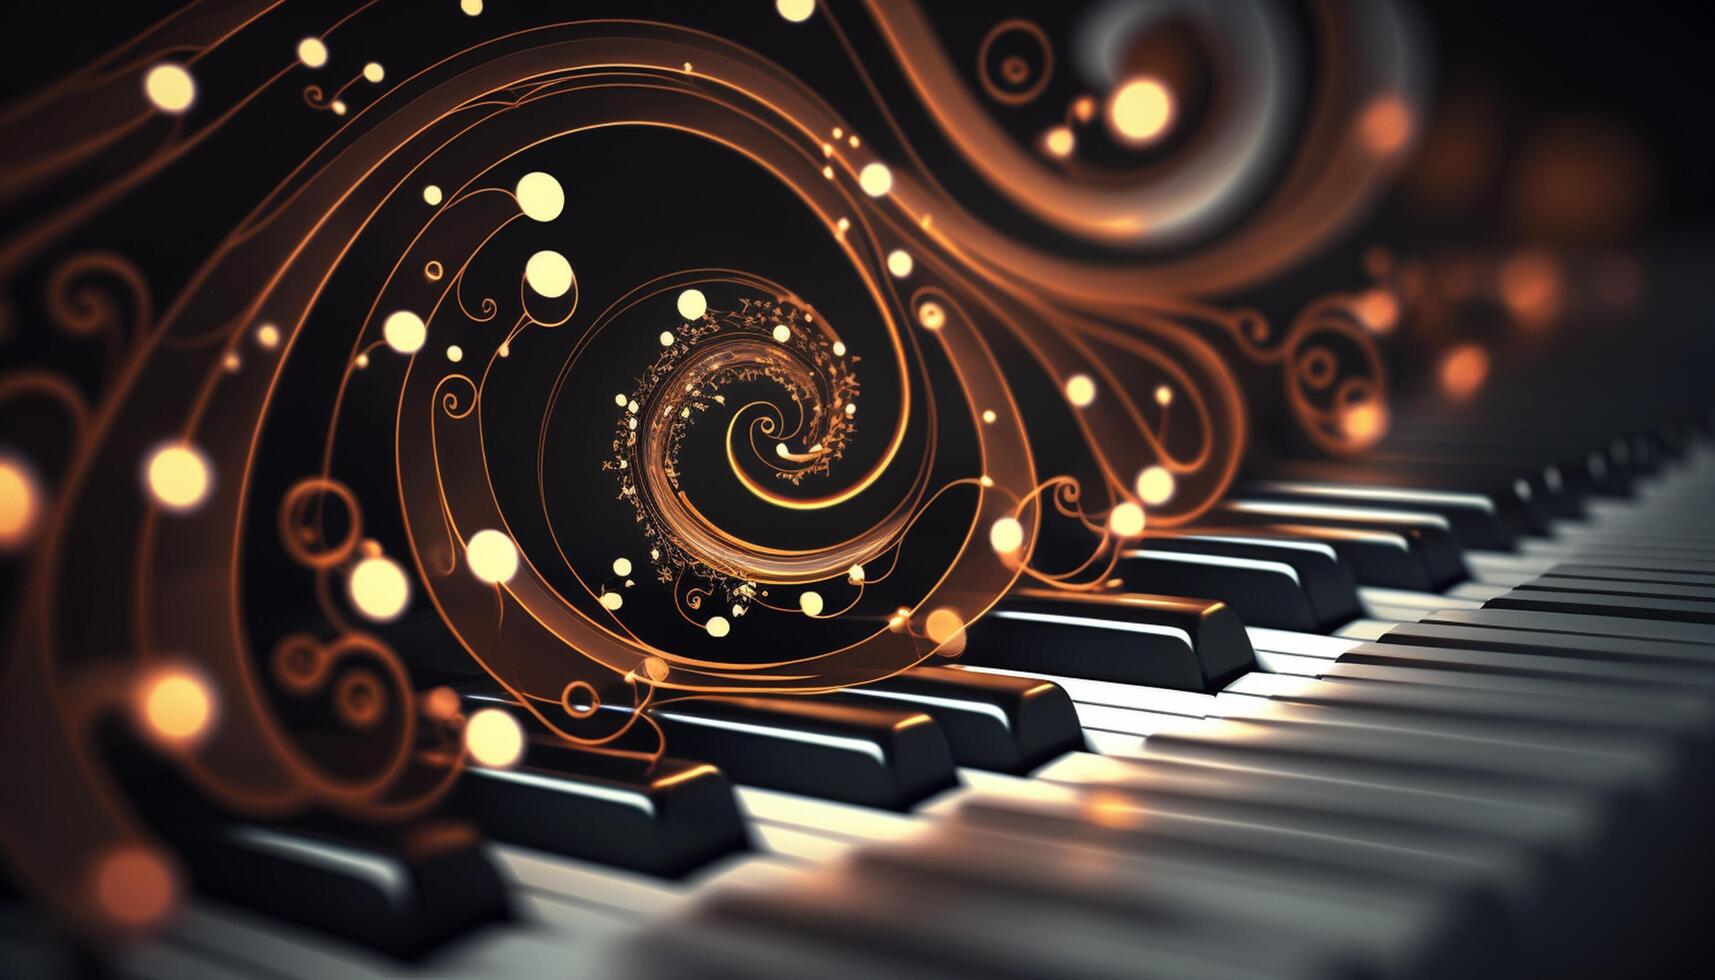 Musical Vortex An Abstract Composition of Piano Keys Representing Sound Waves photo